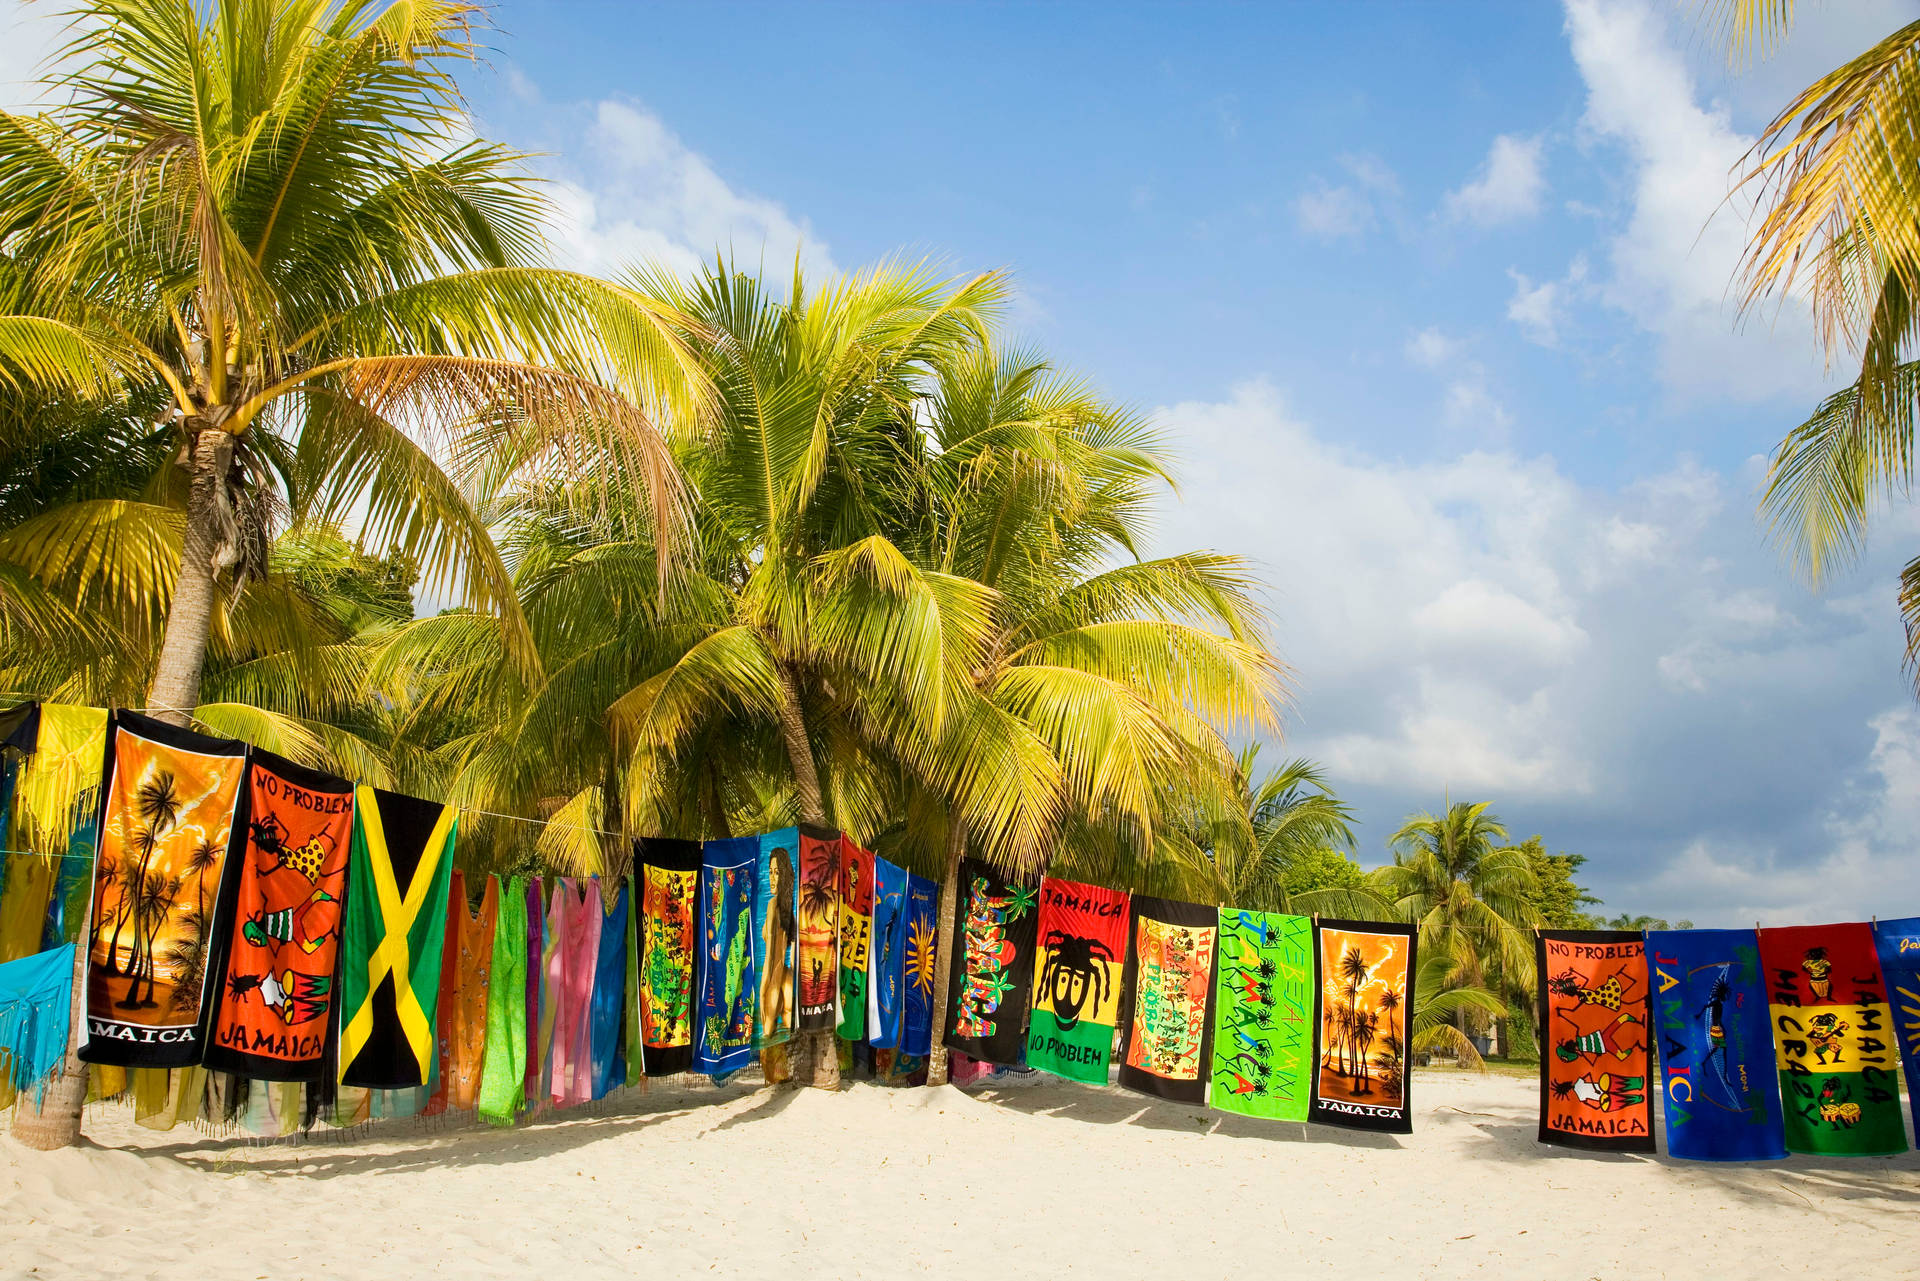 Vibrant Negril Beach View In Jamaica Background